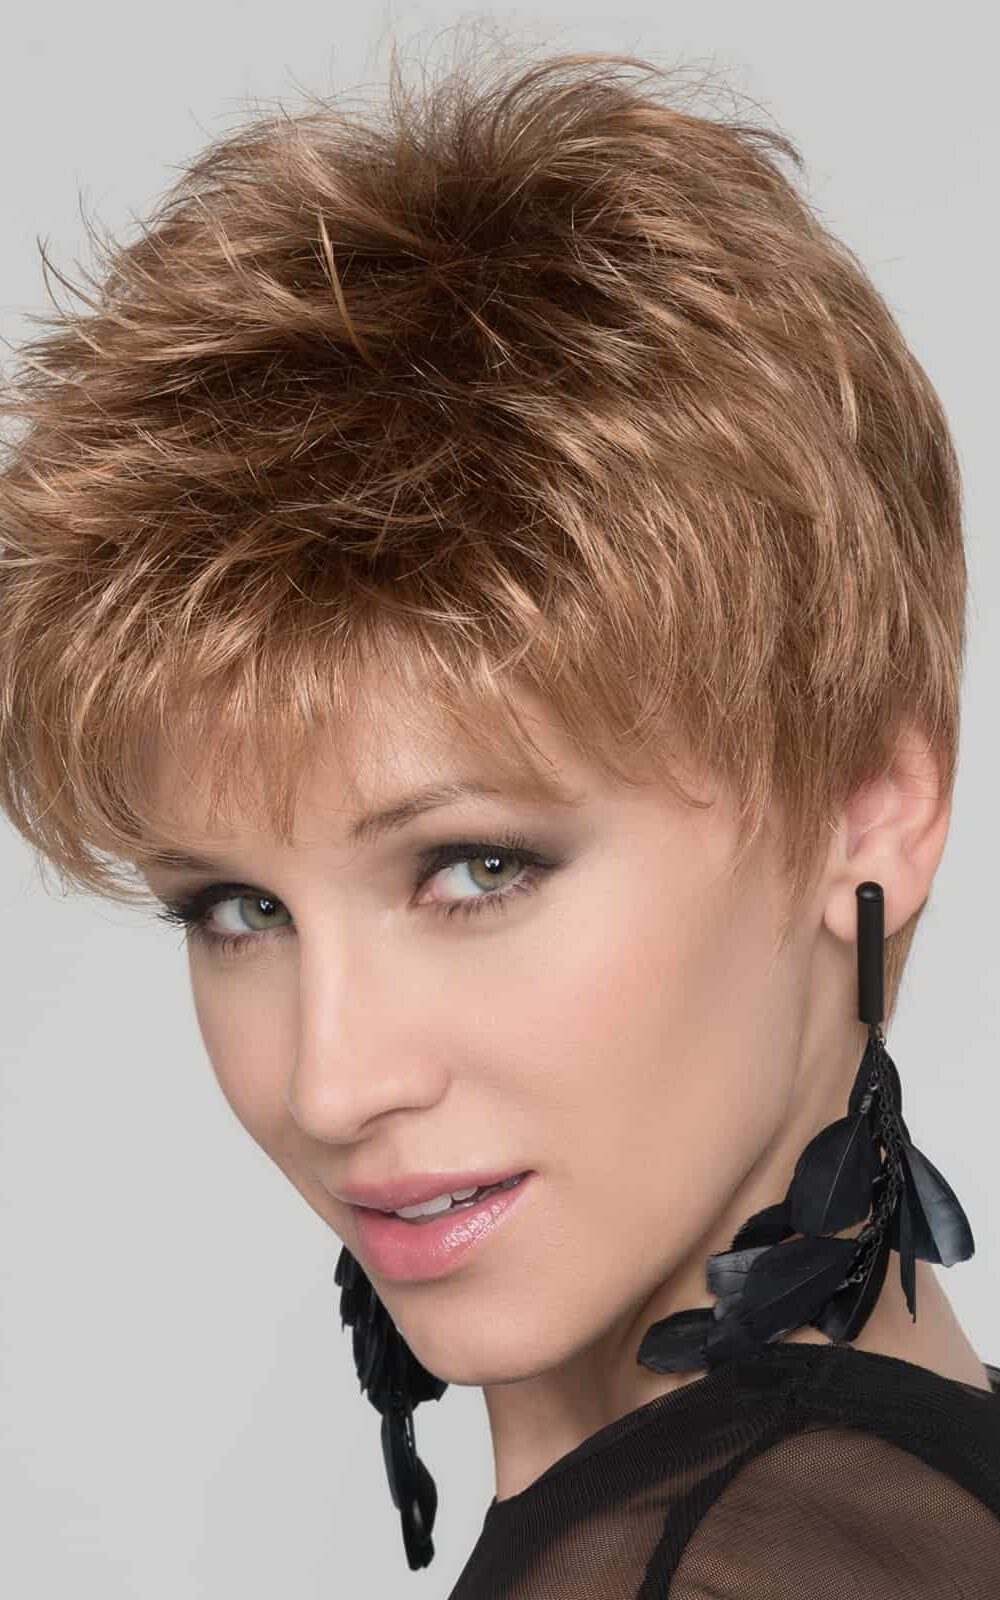 Cheap Wigs | GOLF by Ellen Wille | This short pixie wig can be worn right out of the box | Colour Cognac Mix